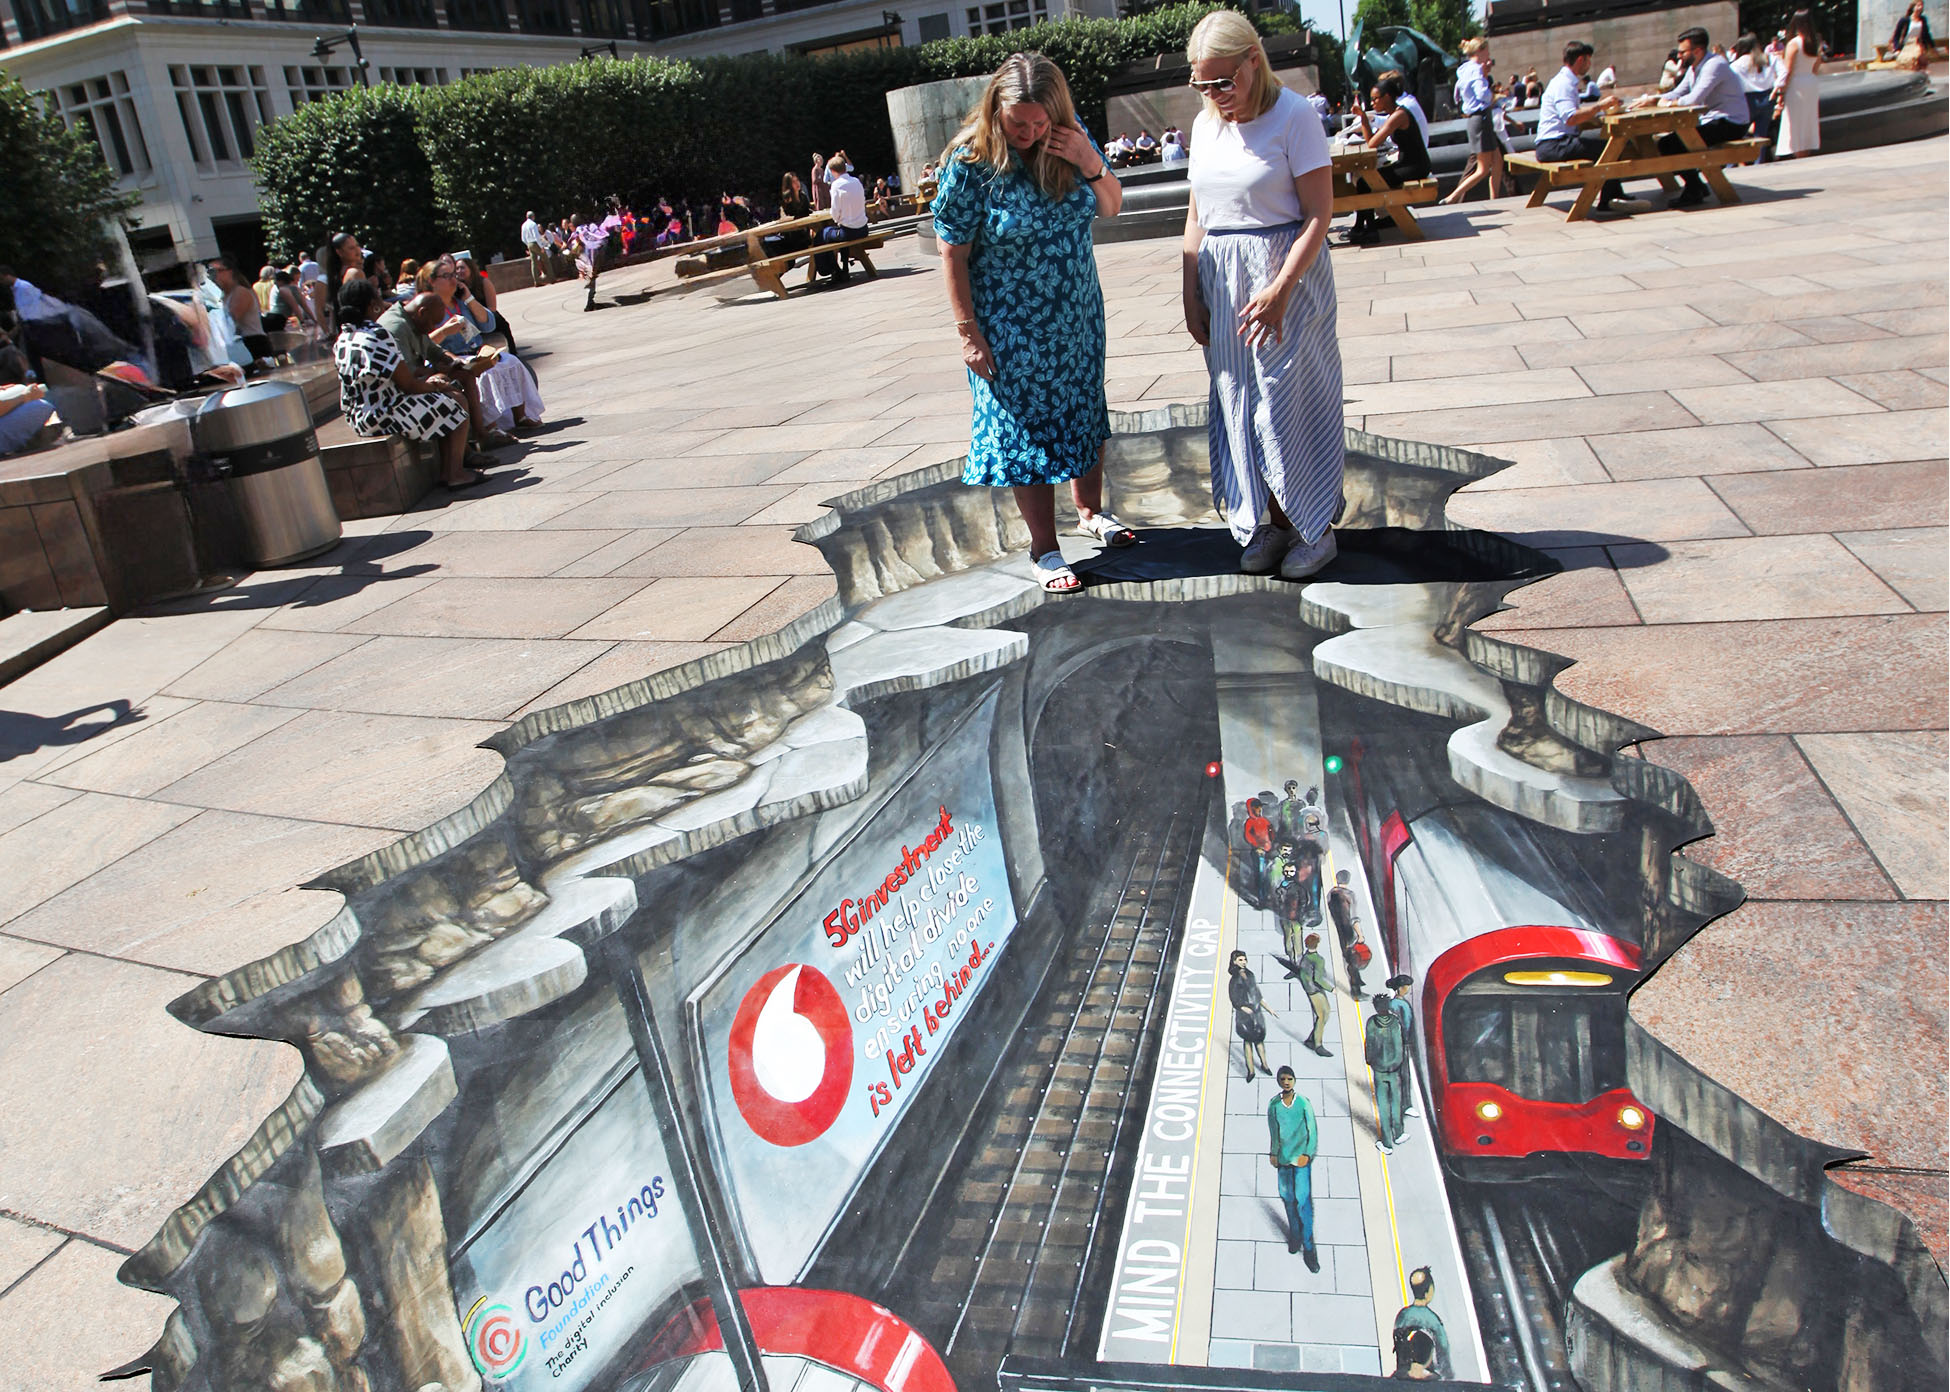 Good Things' CEO Helen Milner stands over a ground mural that illustrates a gap into the tube station below London. Text is painted on the mural that says mind the 5G connectivity gap.